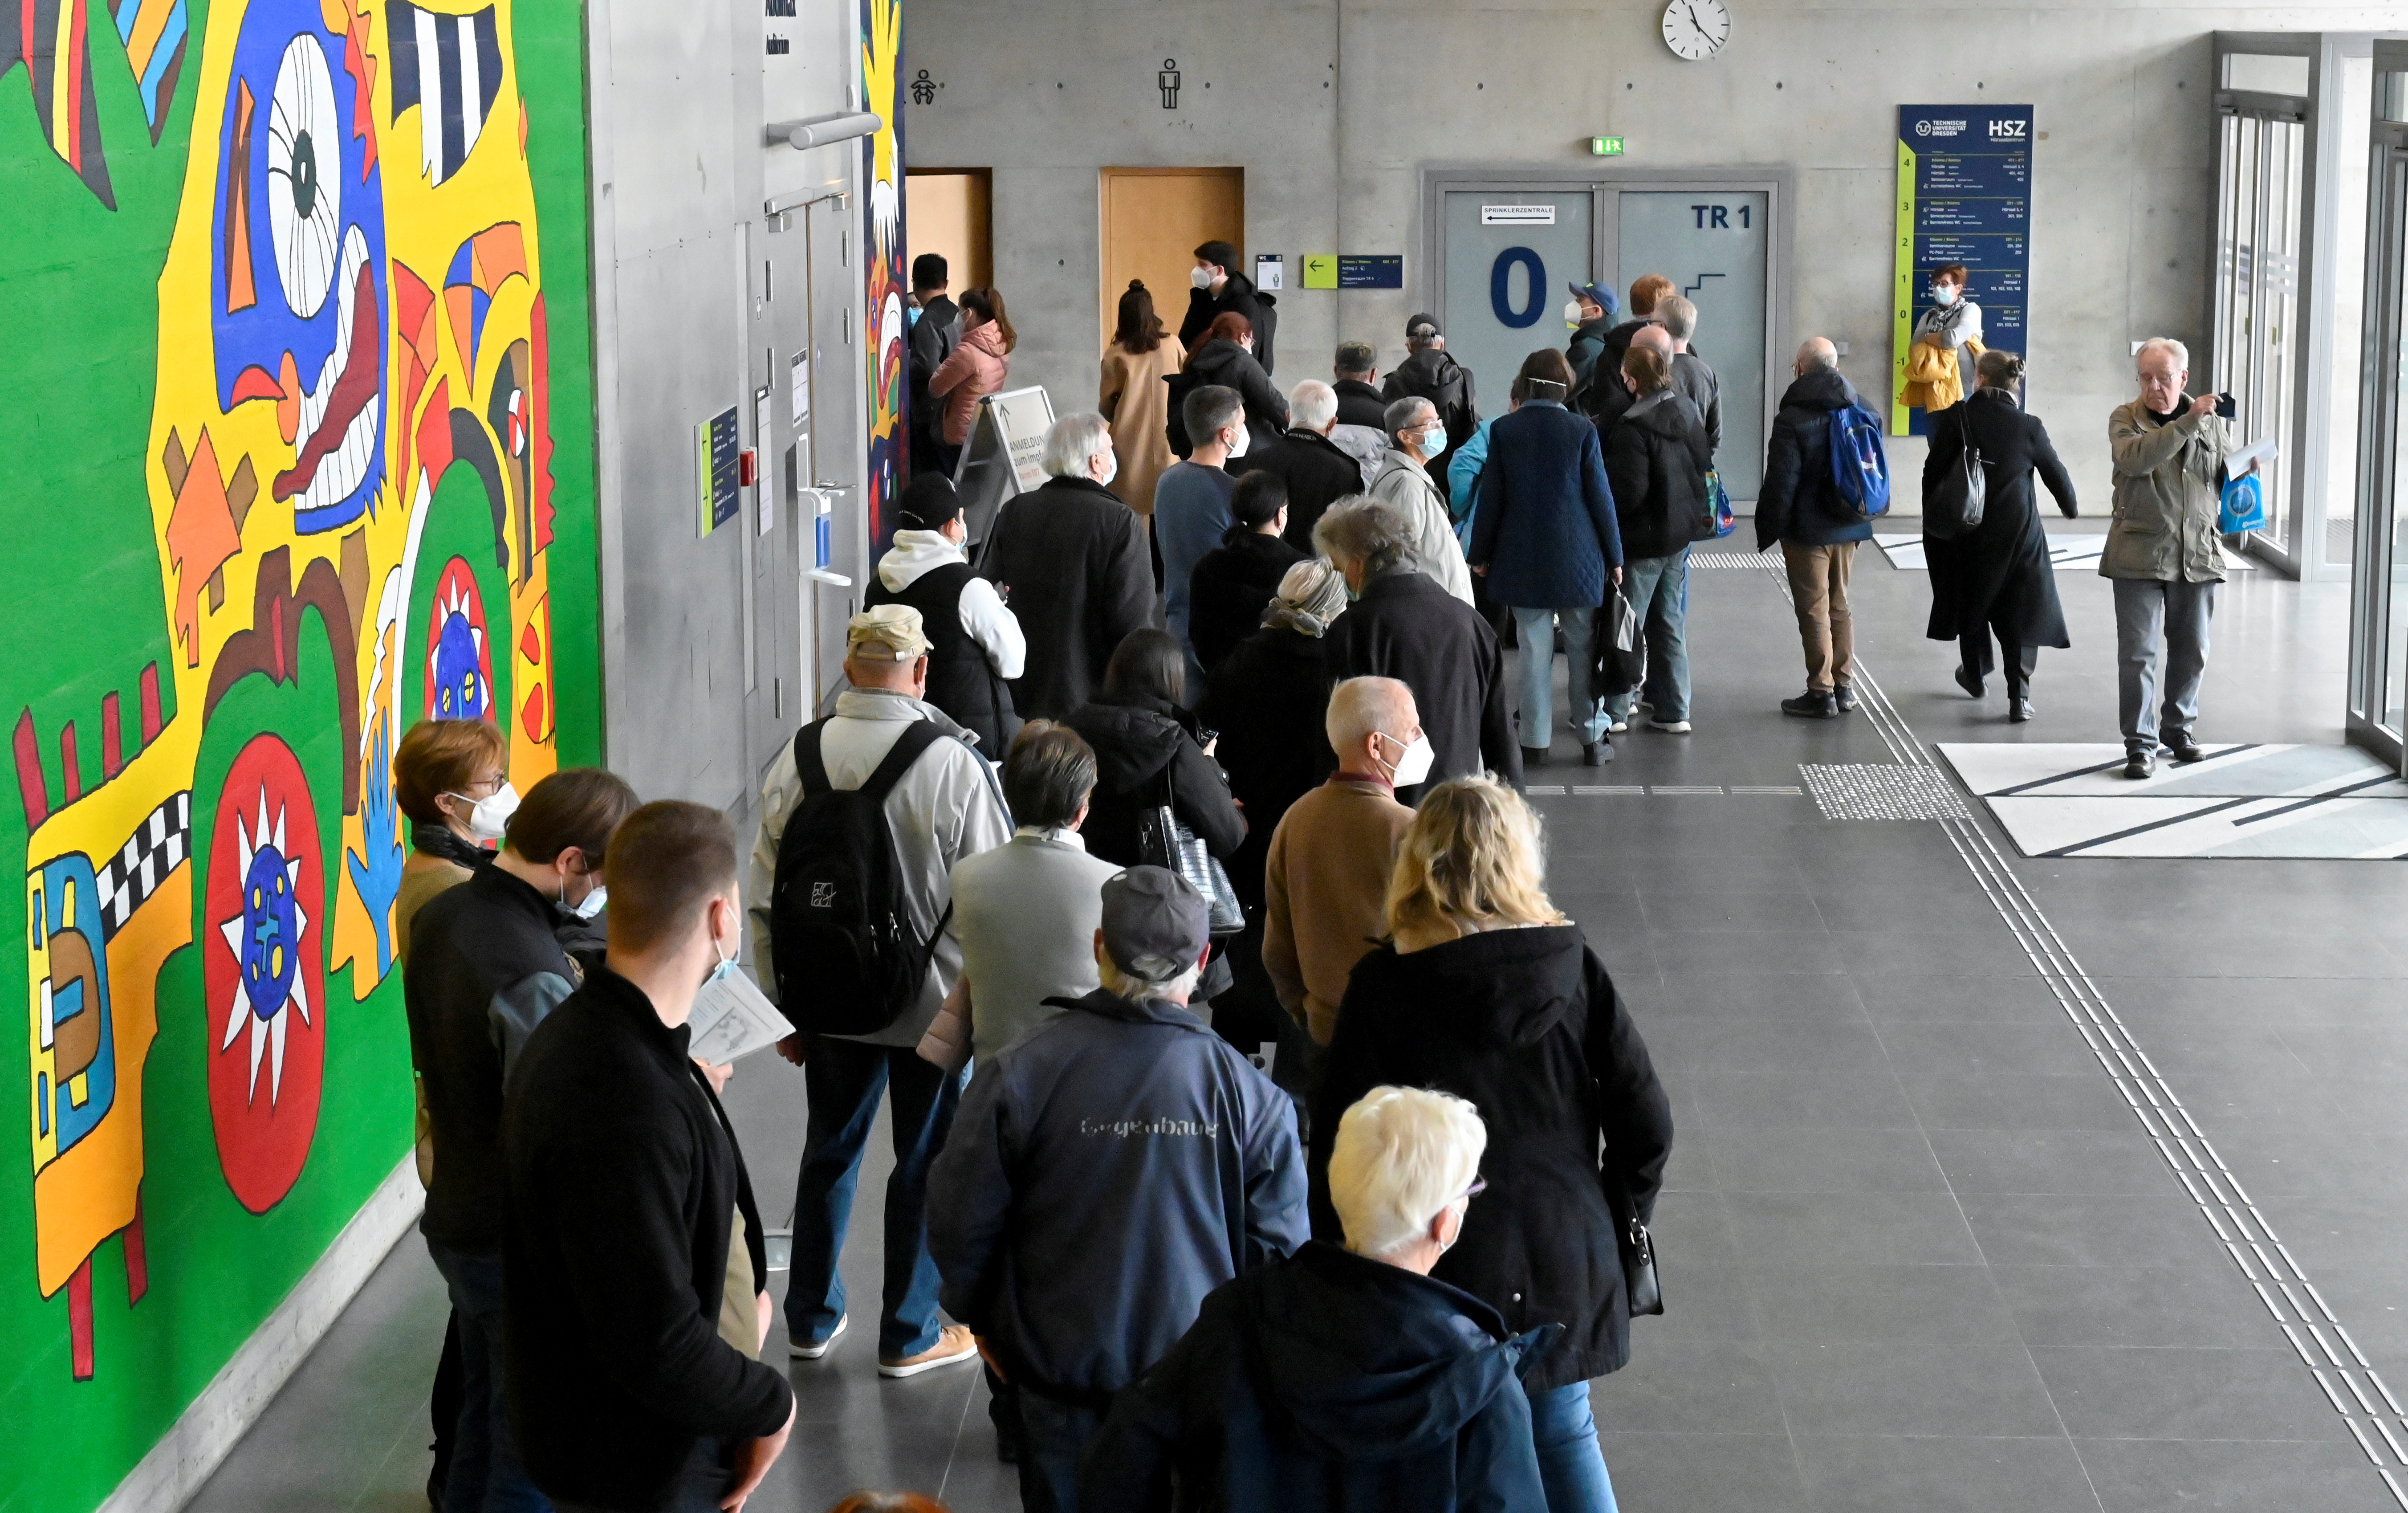 People queue up for vaccination at a temporary vaccination centre inside the campus building of the Technische Universitaet university in Dresden, Germany, November 8, 2021. REUTERS/Matthias Rietschel